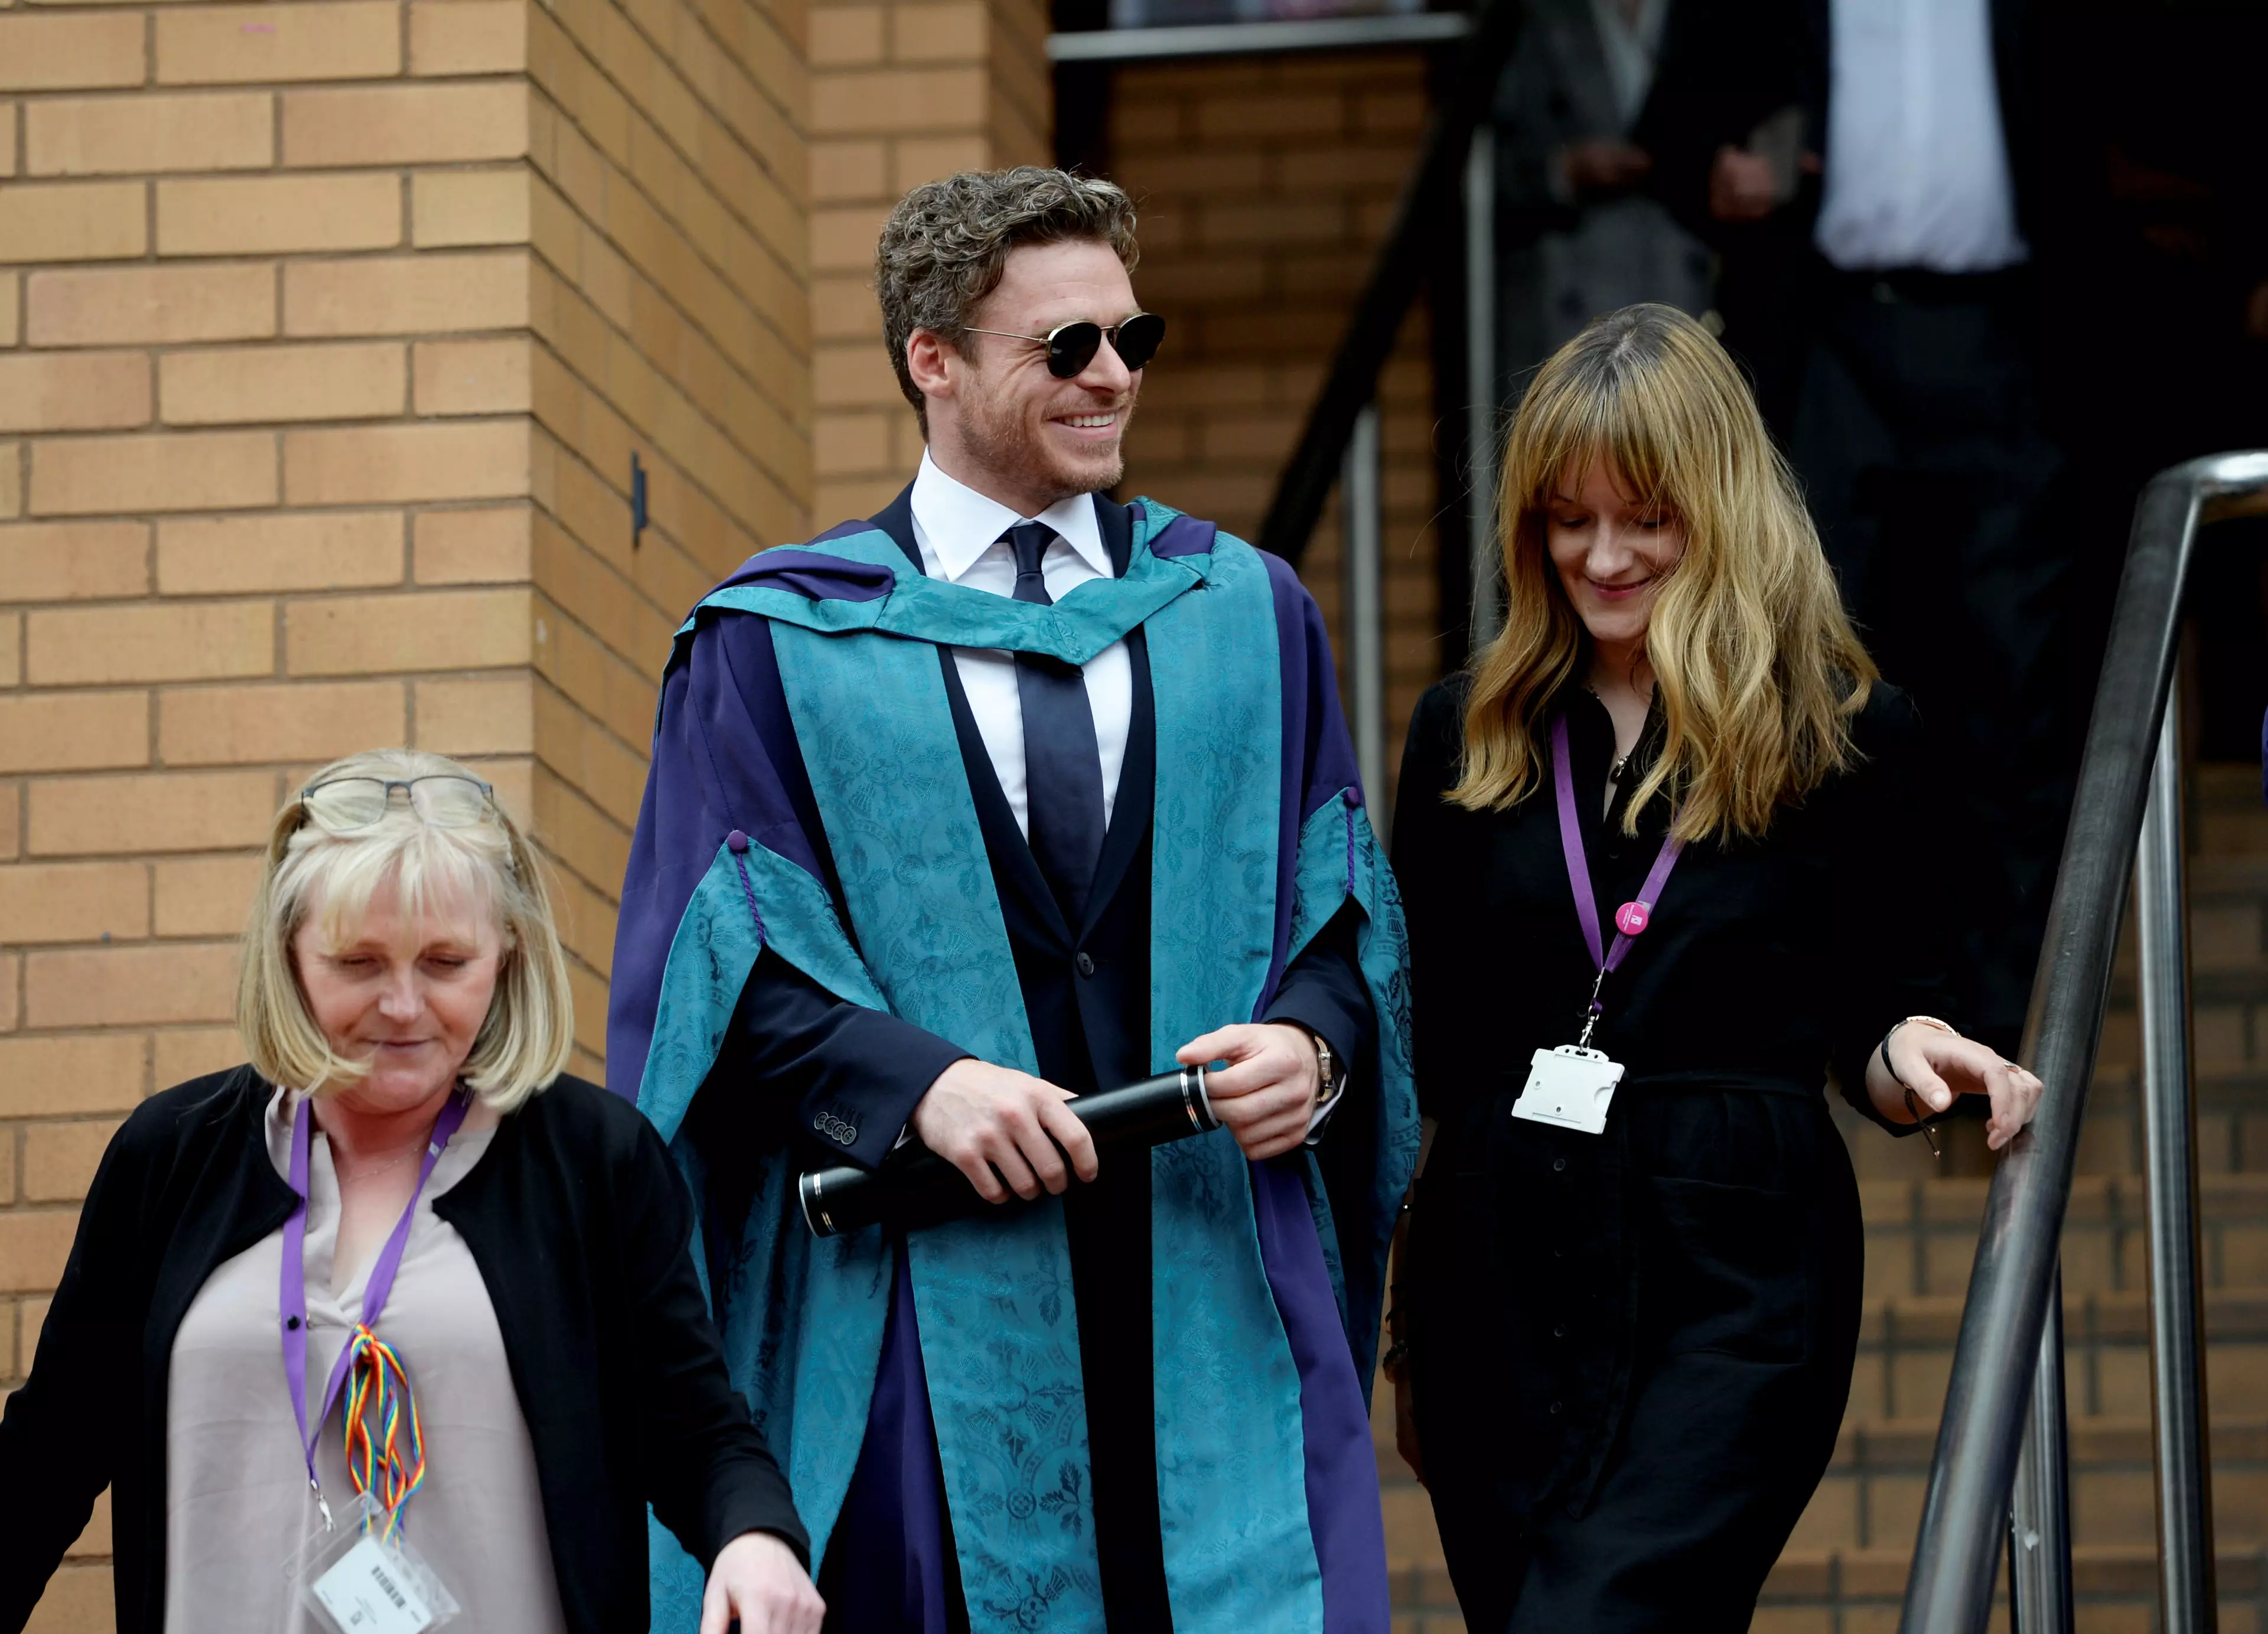 The Bodyguard star attended in a graduation gown.